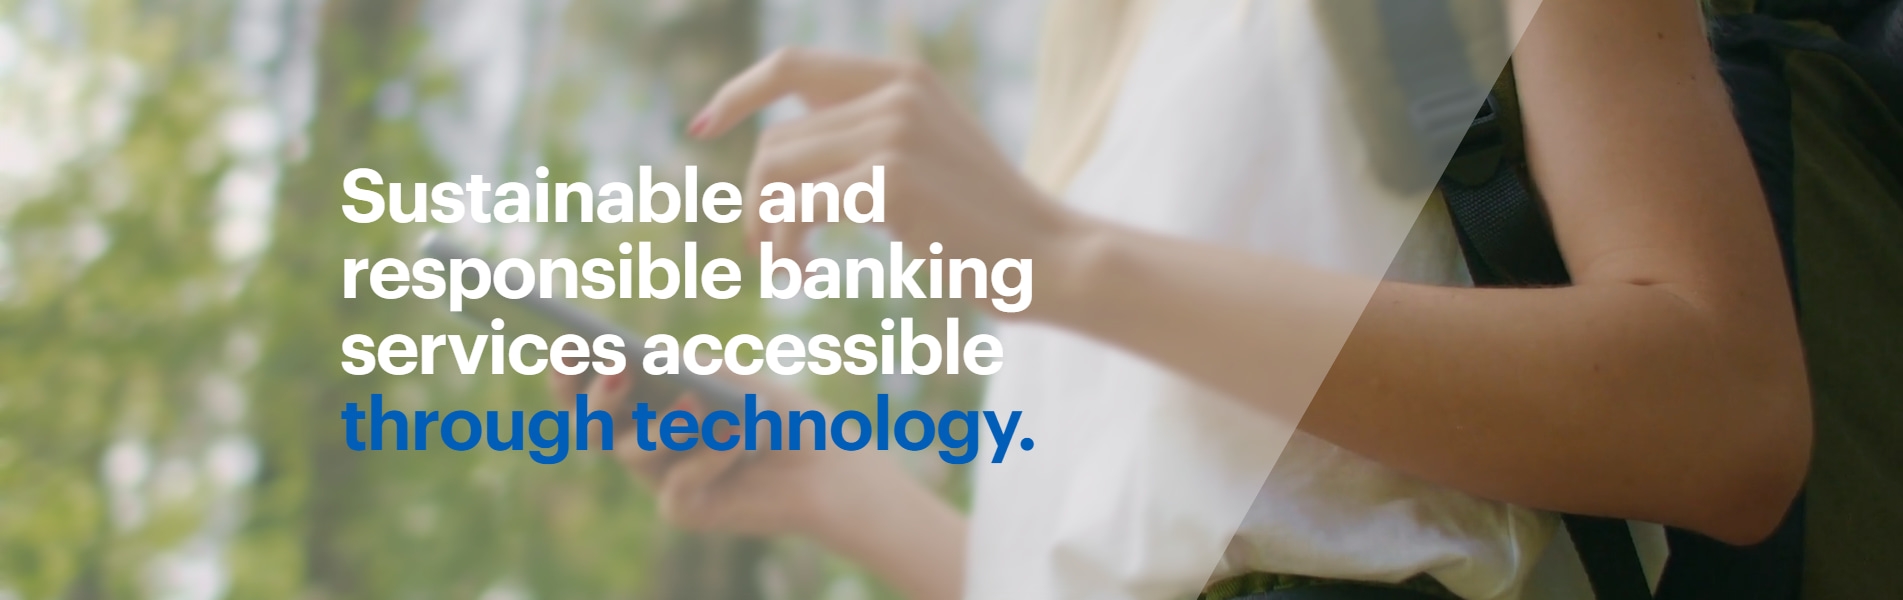 Sustainable and responsible banking services accessible through technology.